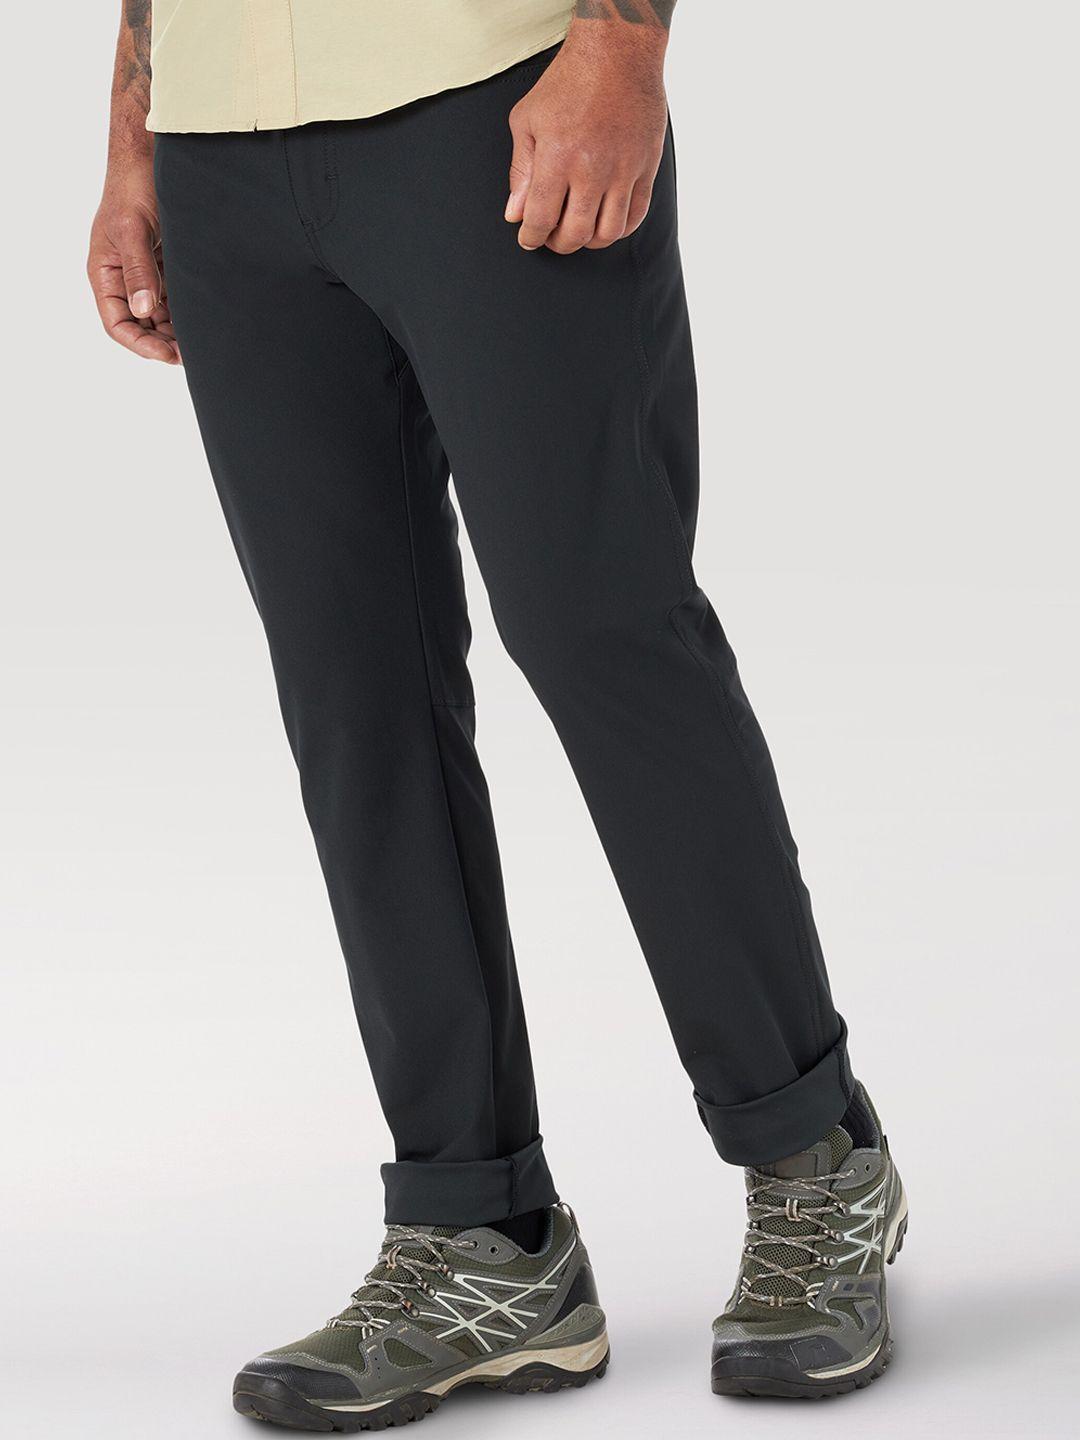 wrangler-men-straight-fit-chinos-trousers